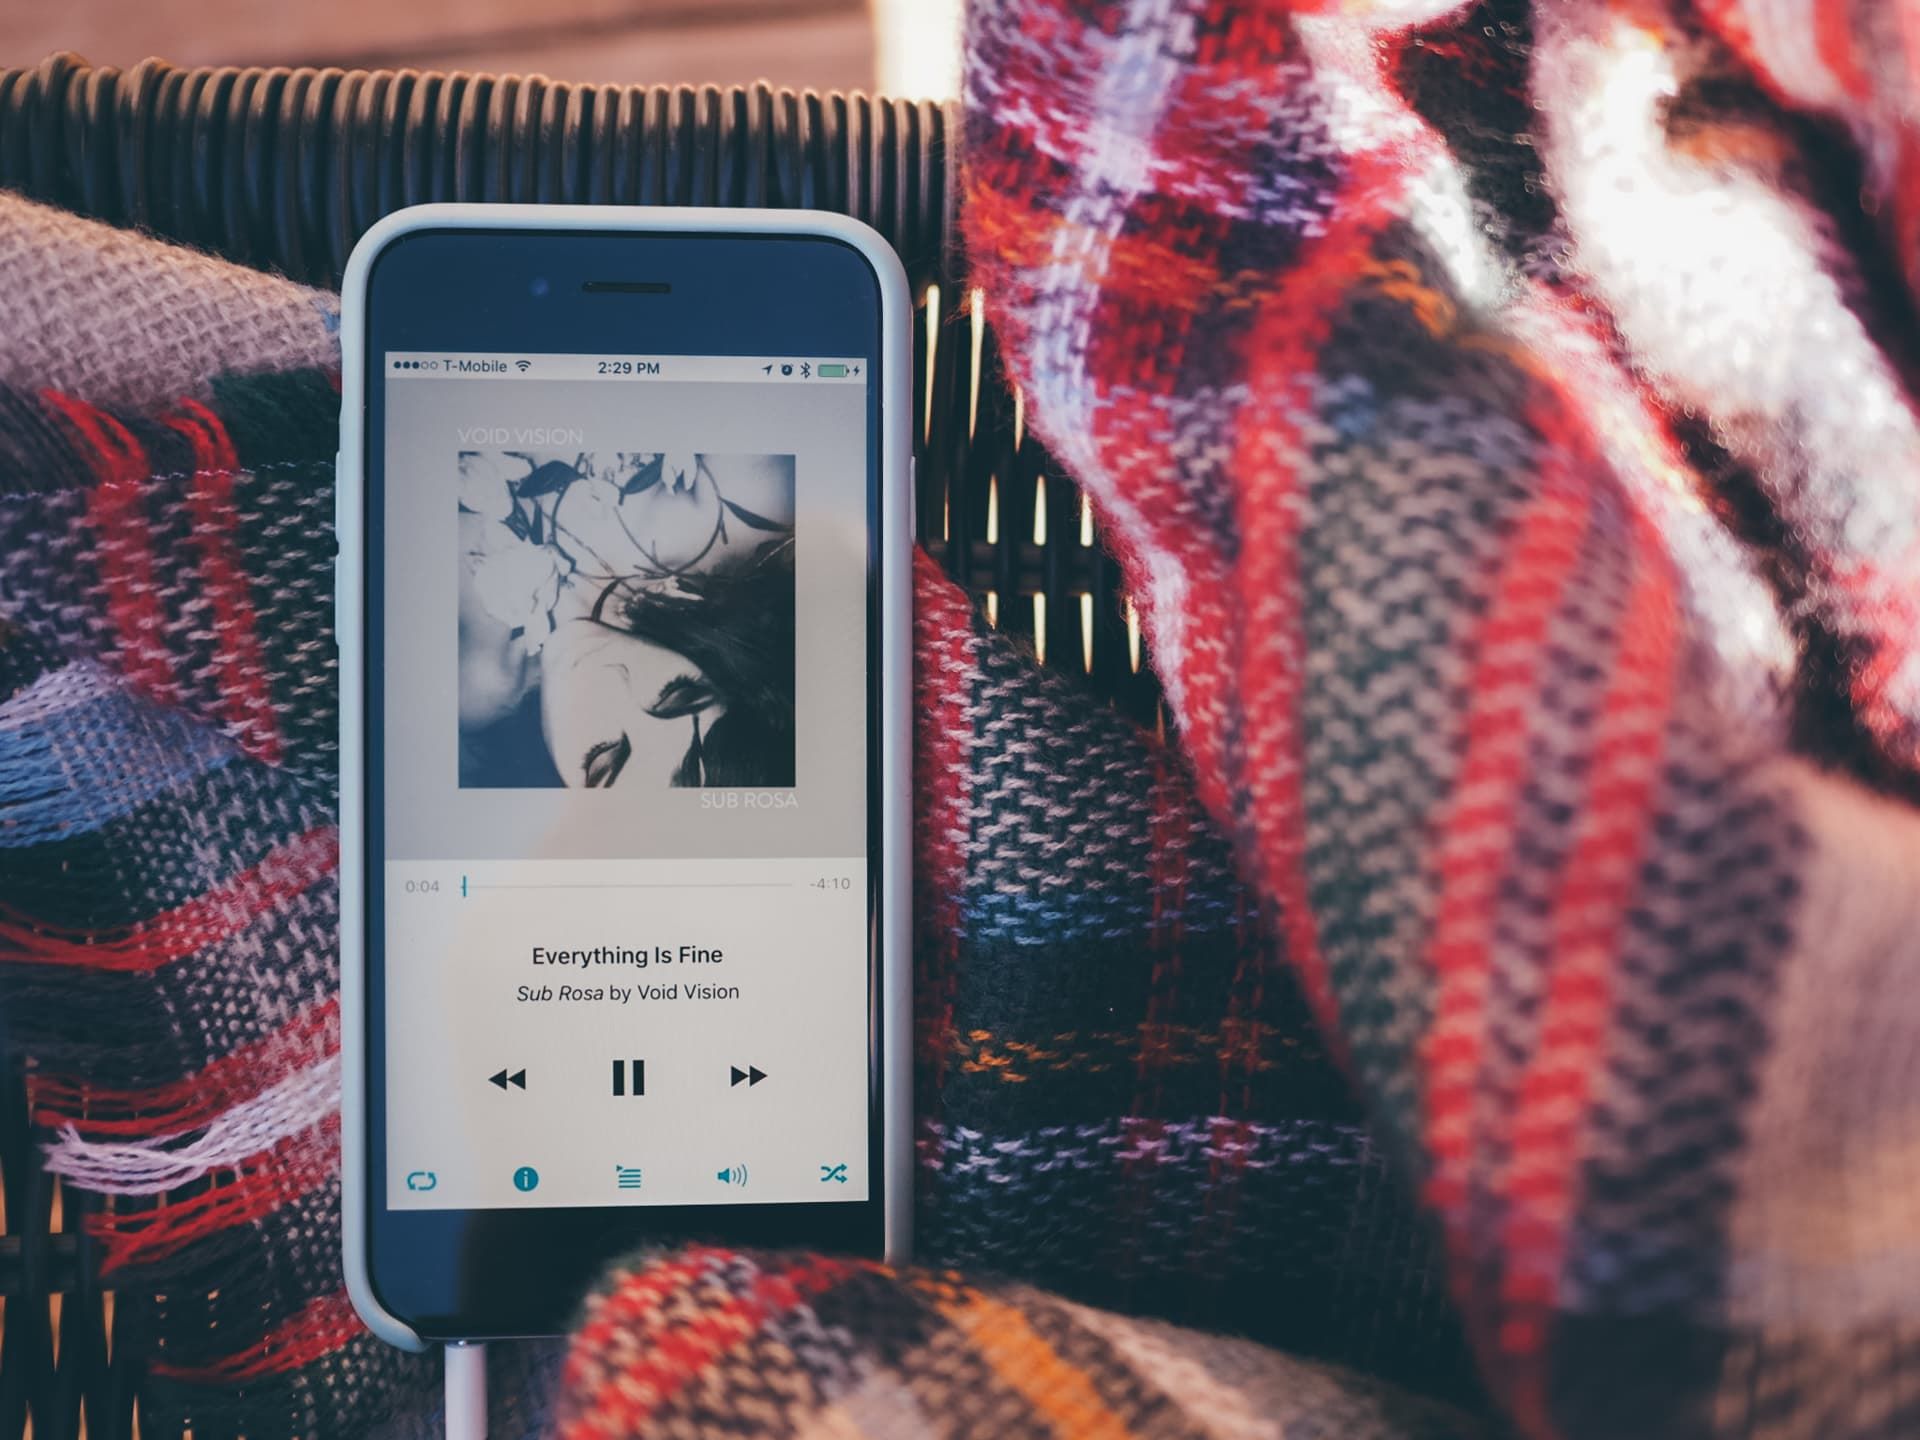 How To Get Music App Back On IPhone